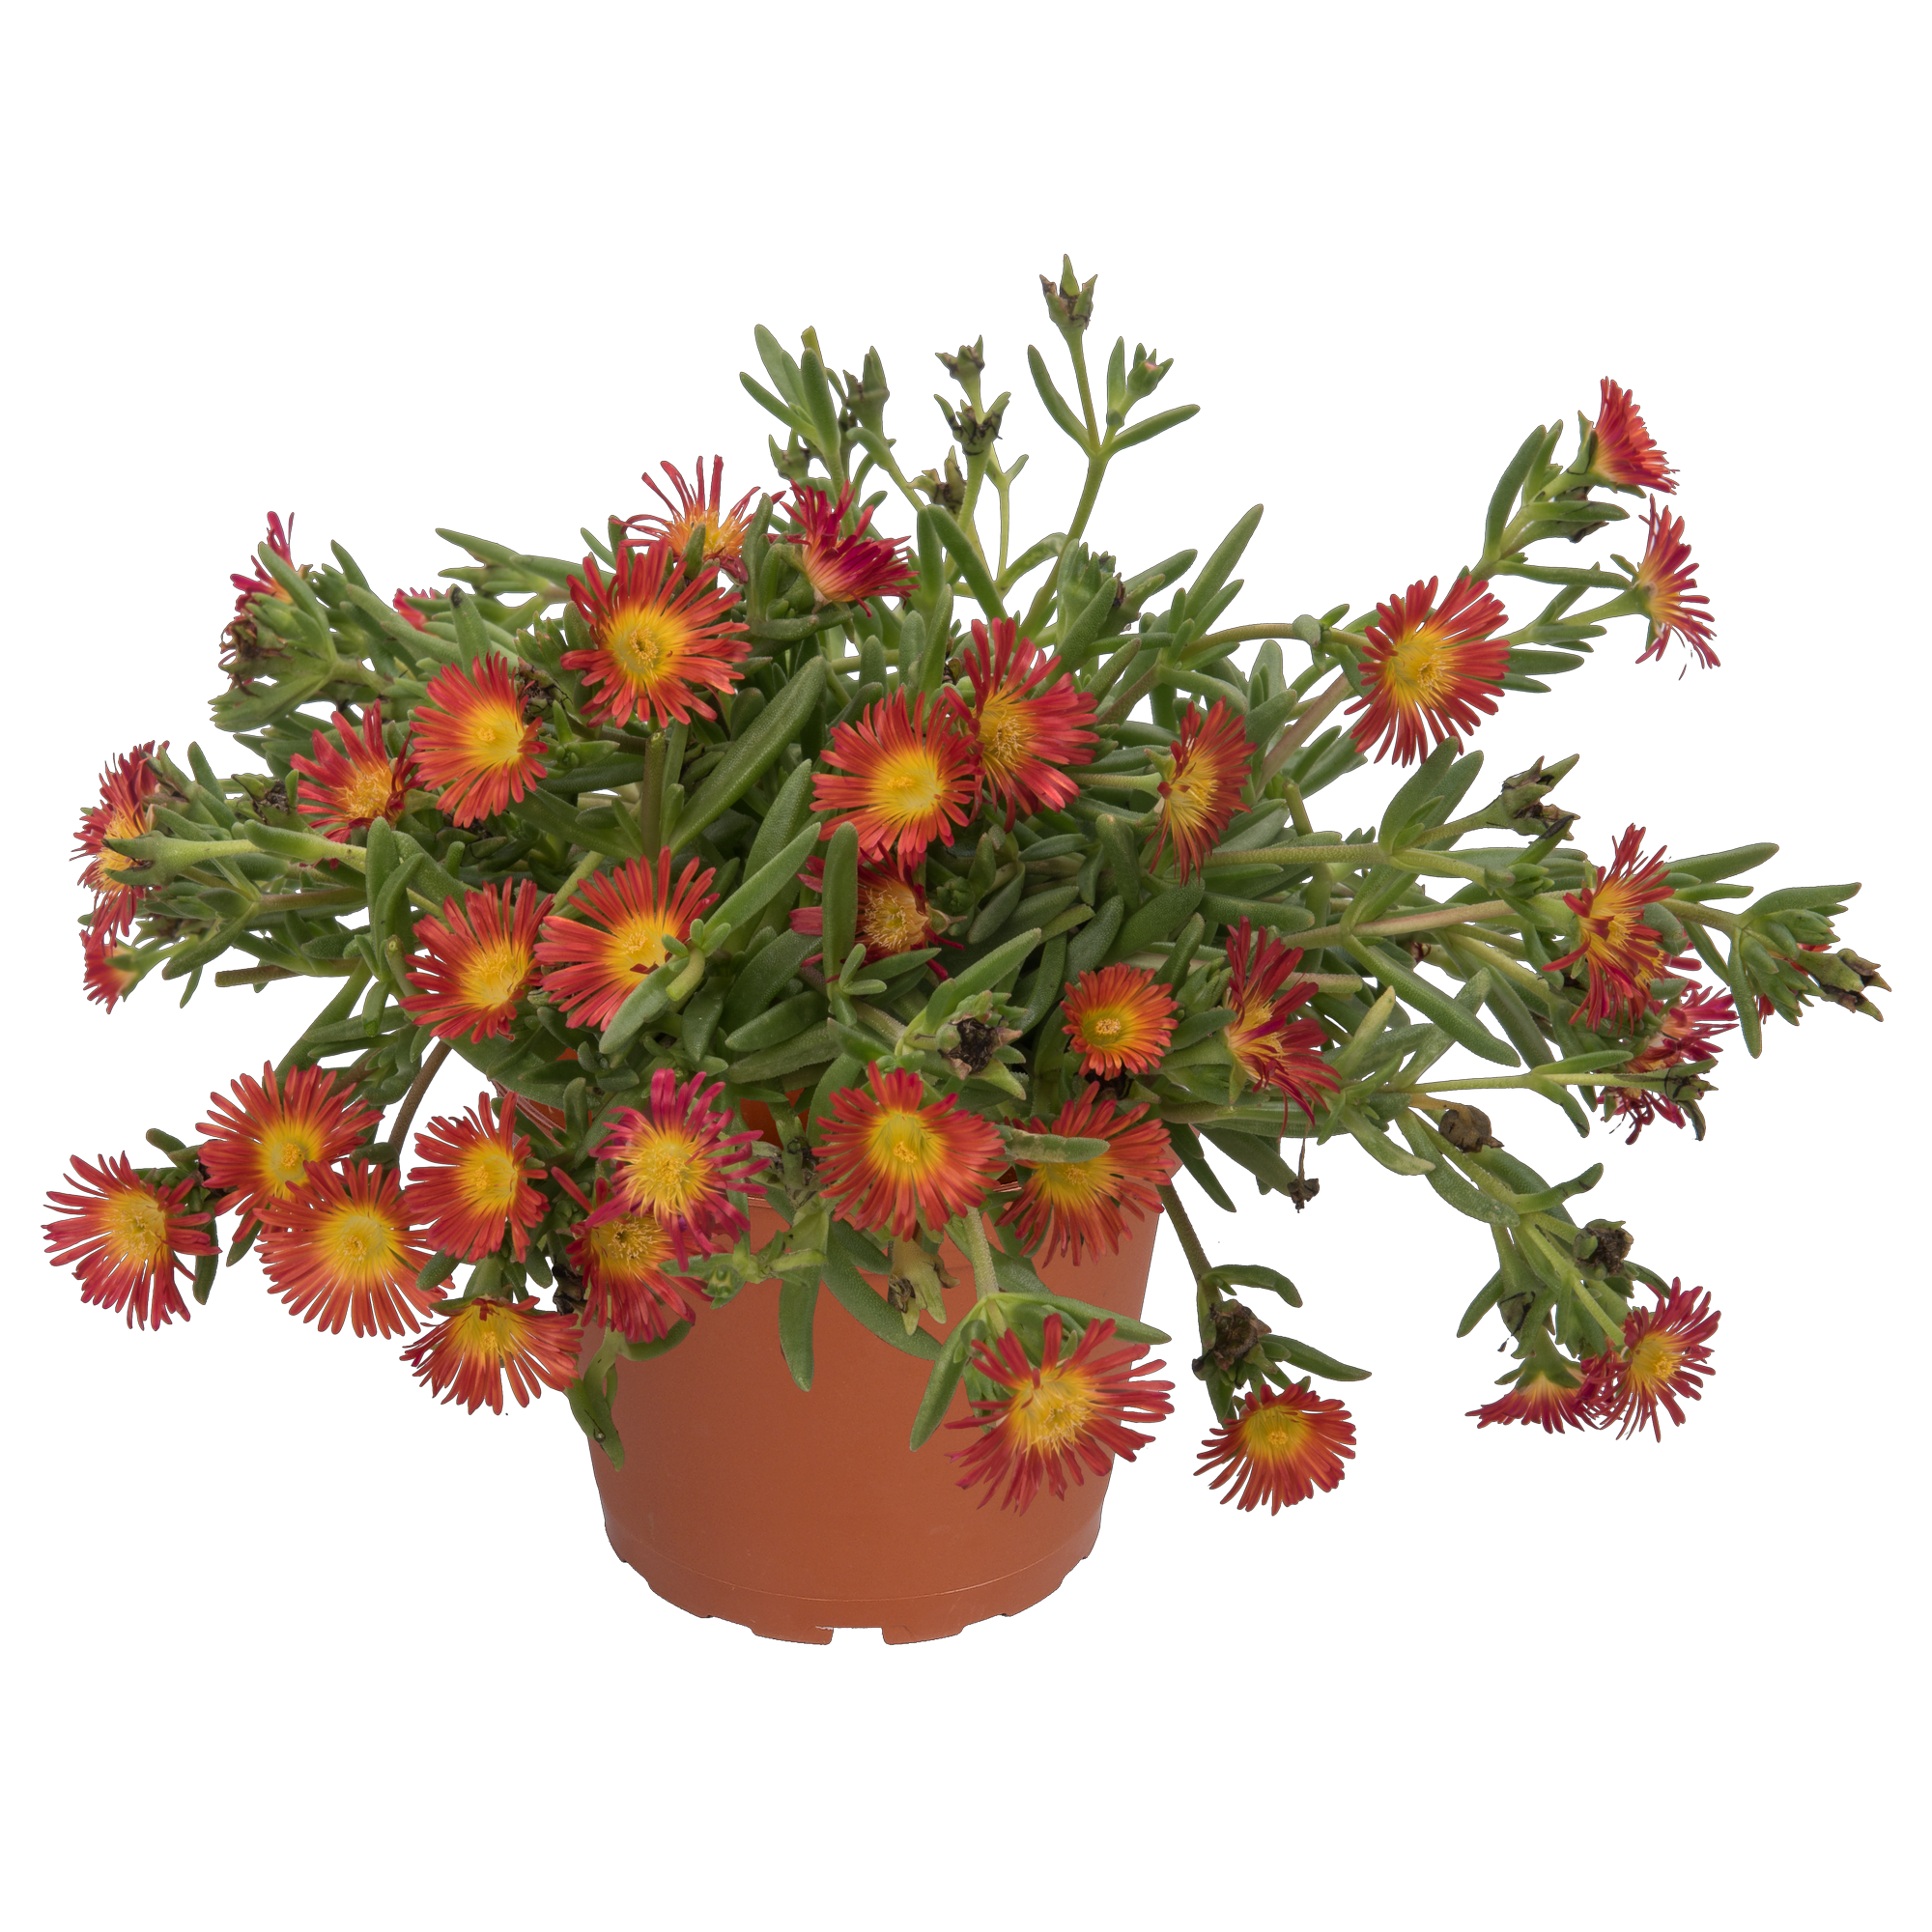 Mittagsblume 'Wheels of Wonder® Fire Wonder' rot-gelb 12 cm Topf + product picture